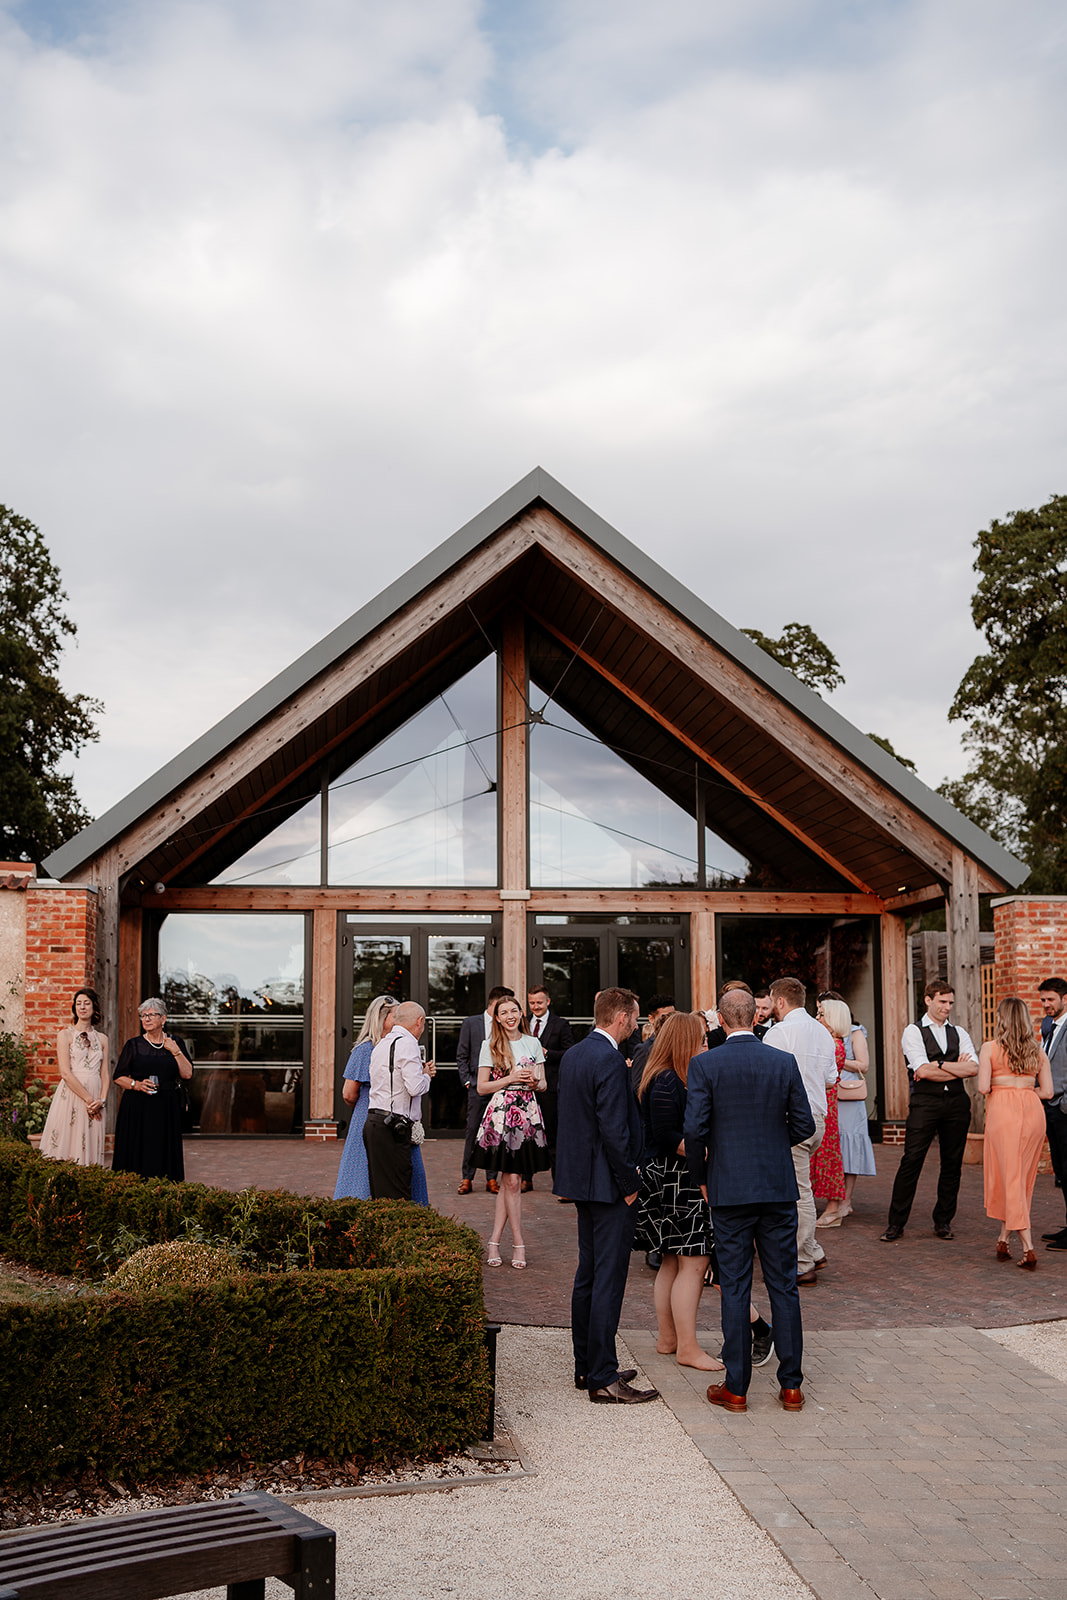 Guests enjoying the warm evening in the walled garden at this Syrencot wedding